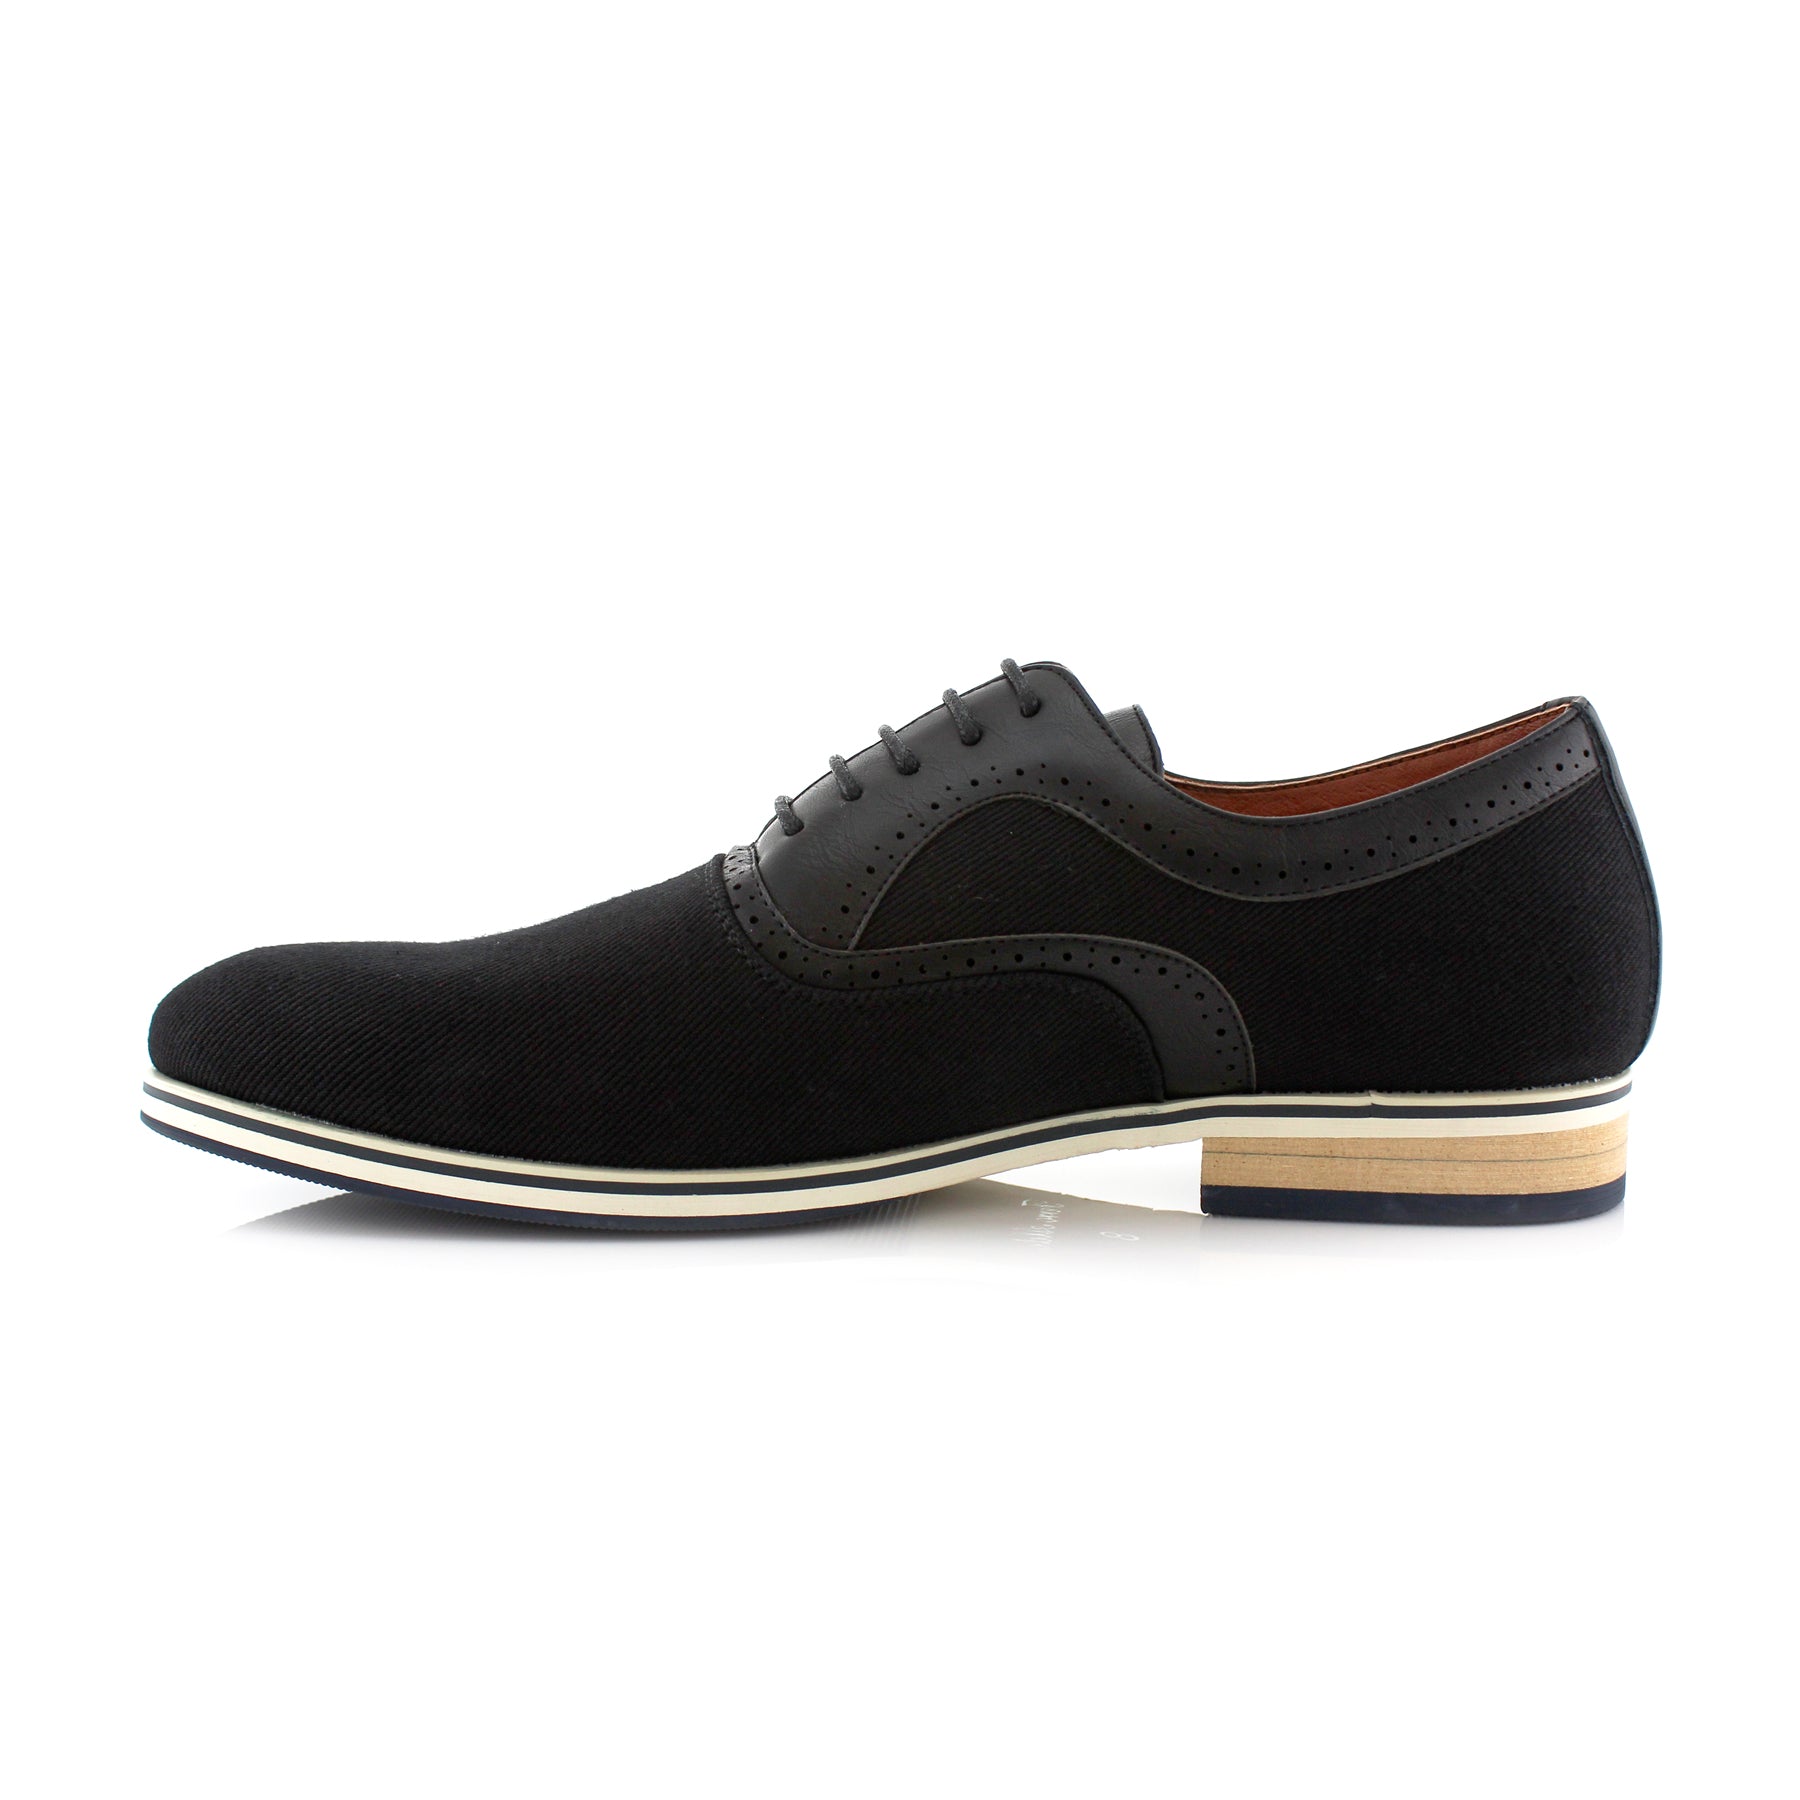 Duo-Textured Casual Oxfords | Edmonds by Ferro Aldo | Conal Footwear | Inner Side Angle View